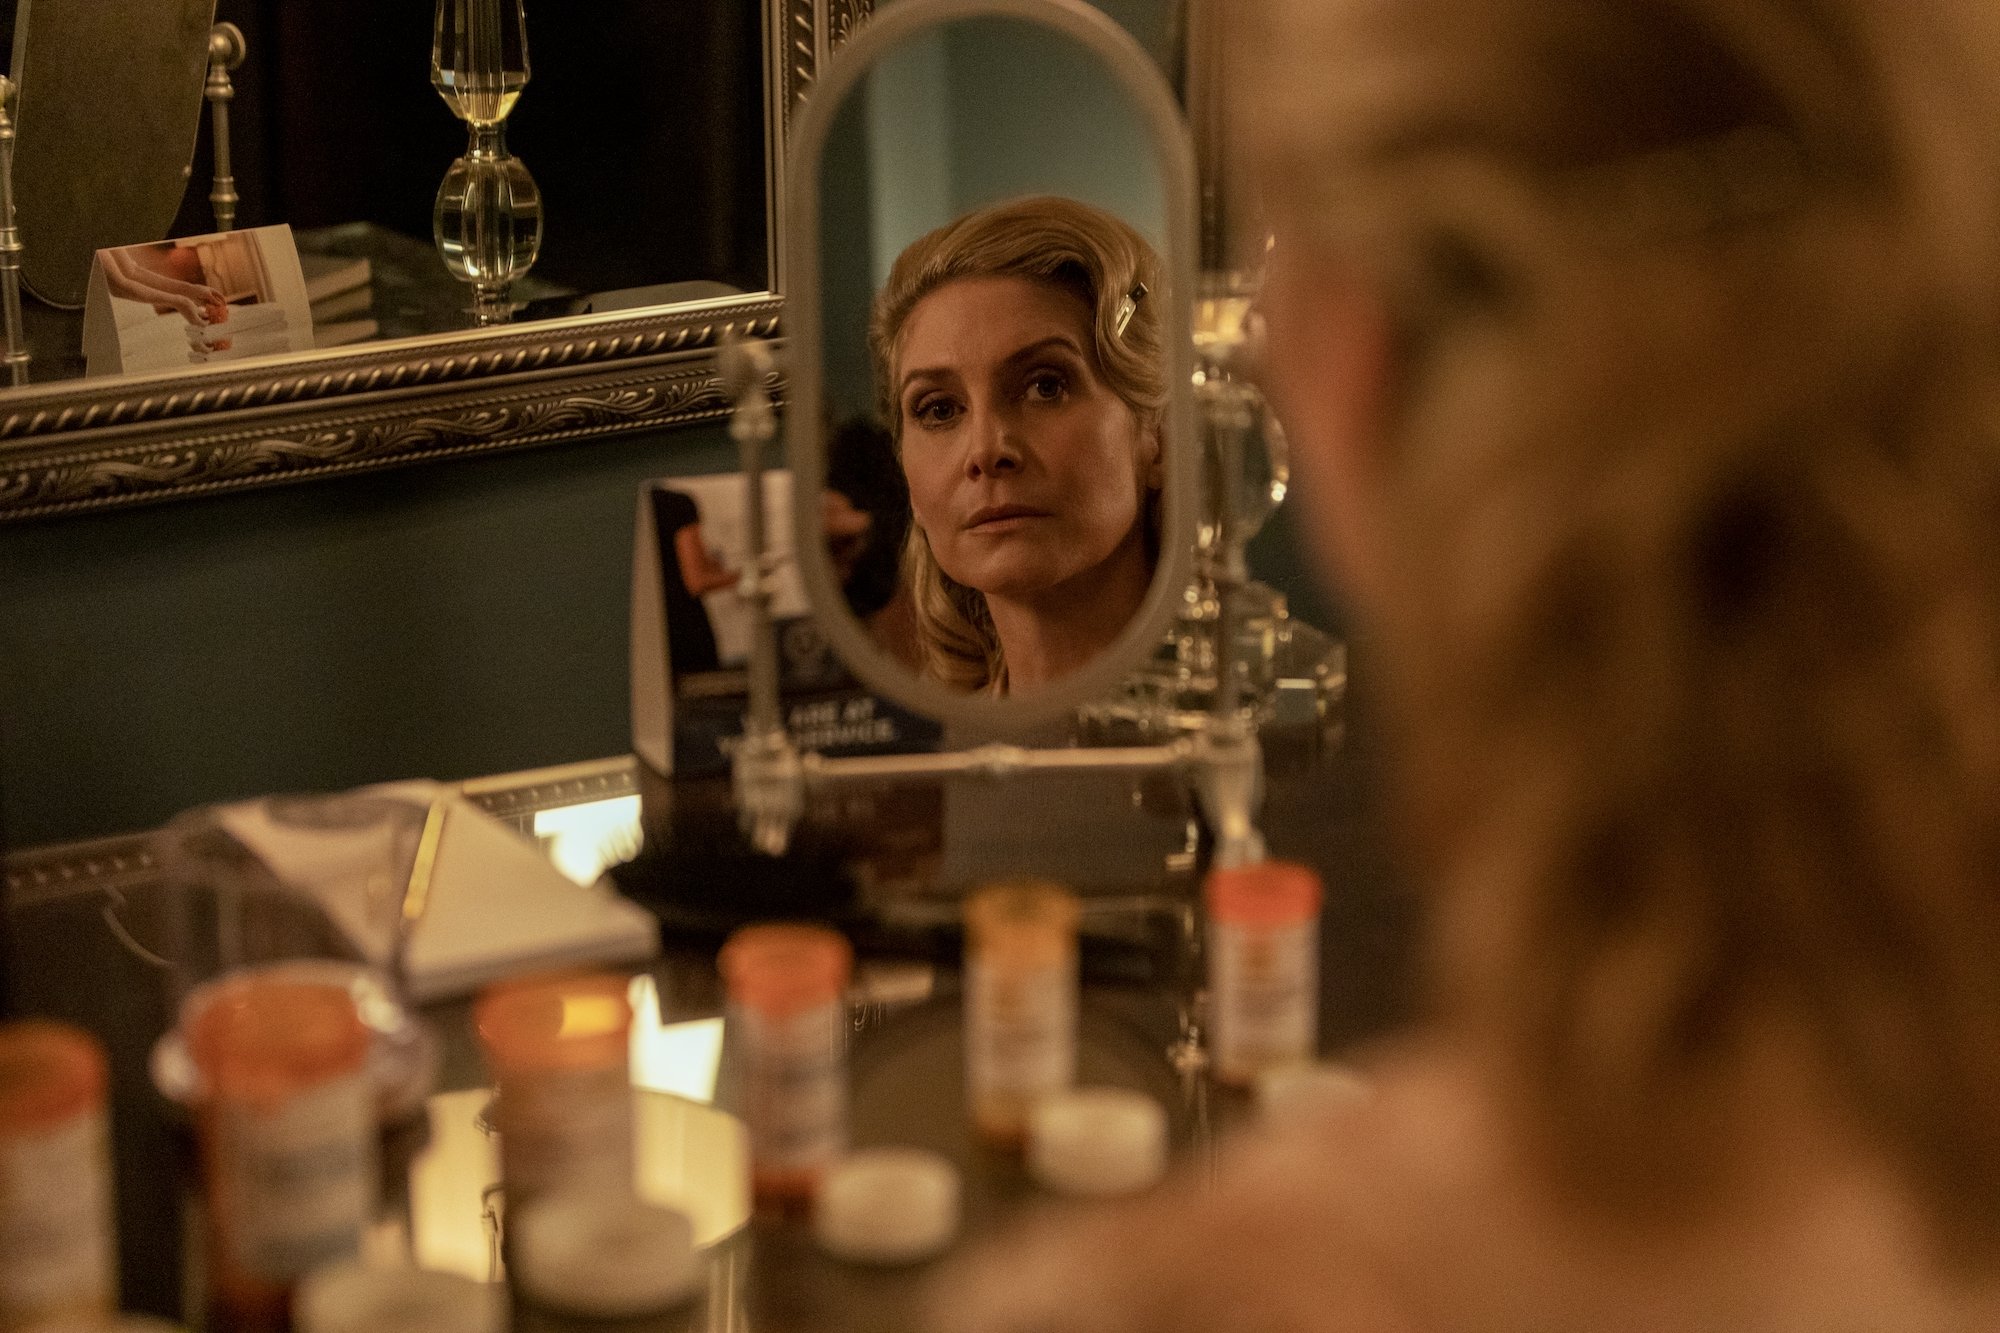 Carla Limbrey, played by Elizabeth Mitchell, looking into a vanity mirror in the Netflix series 'Outer Banks'